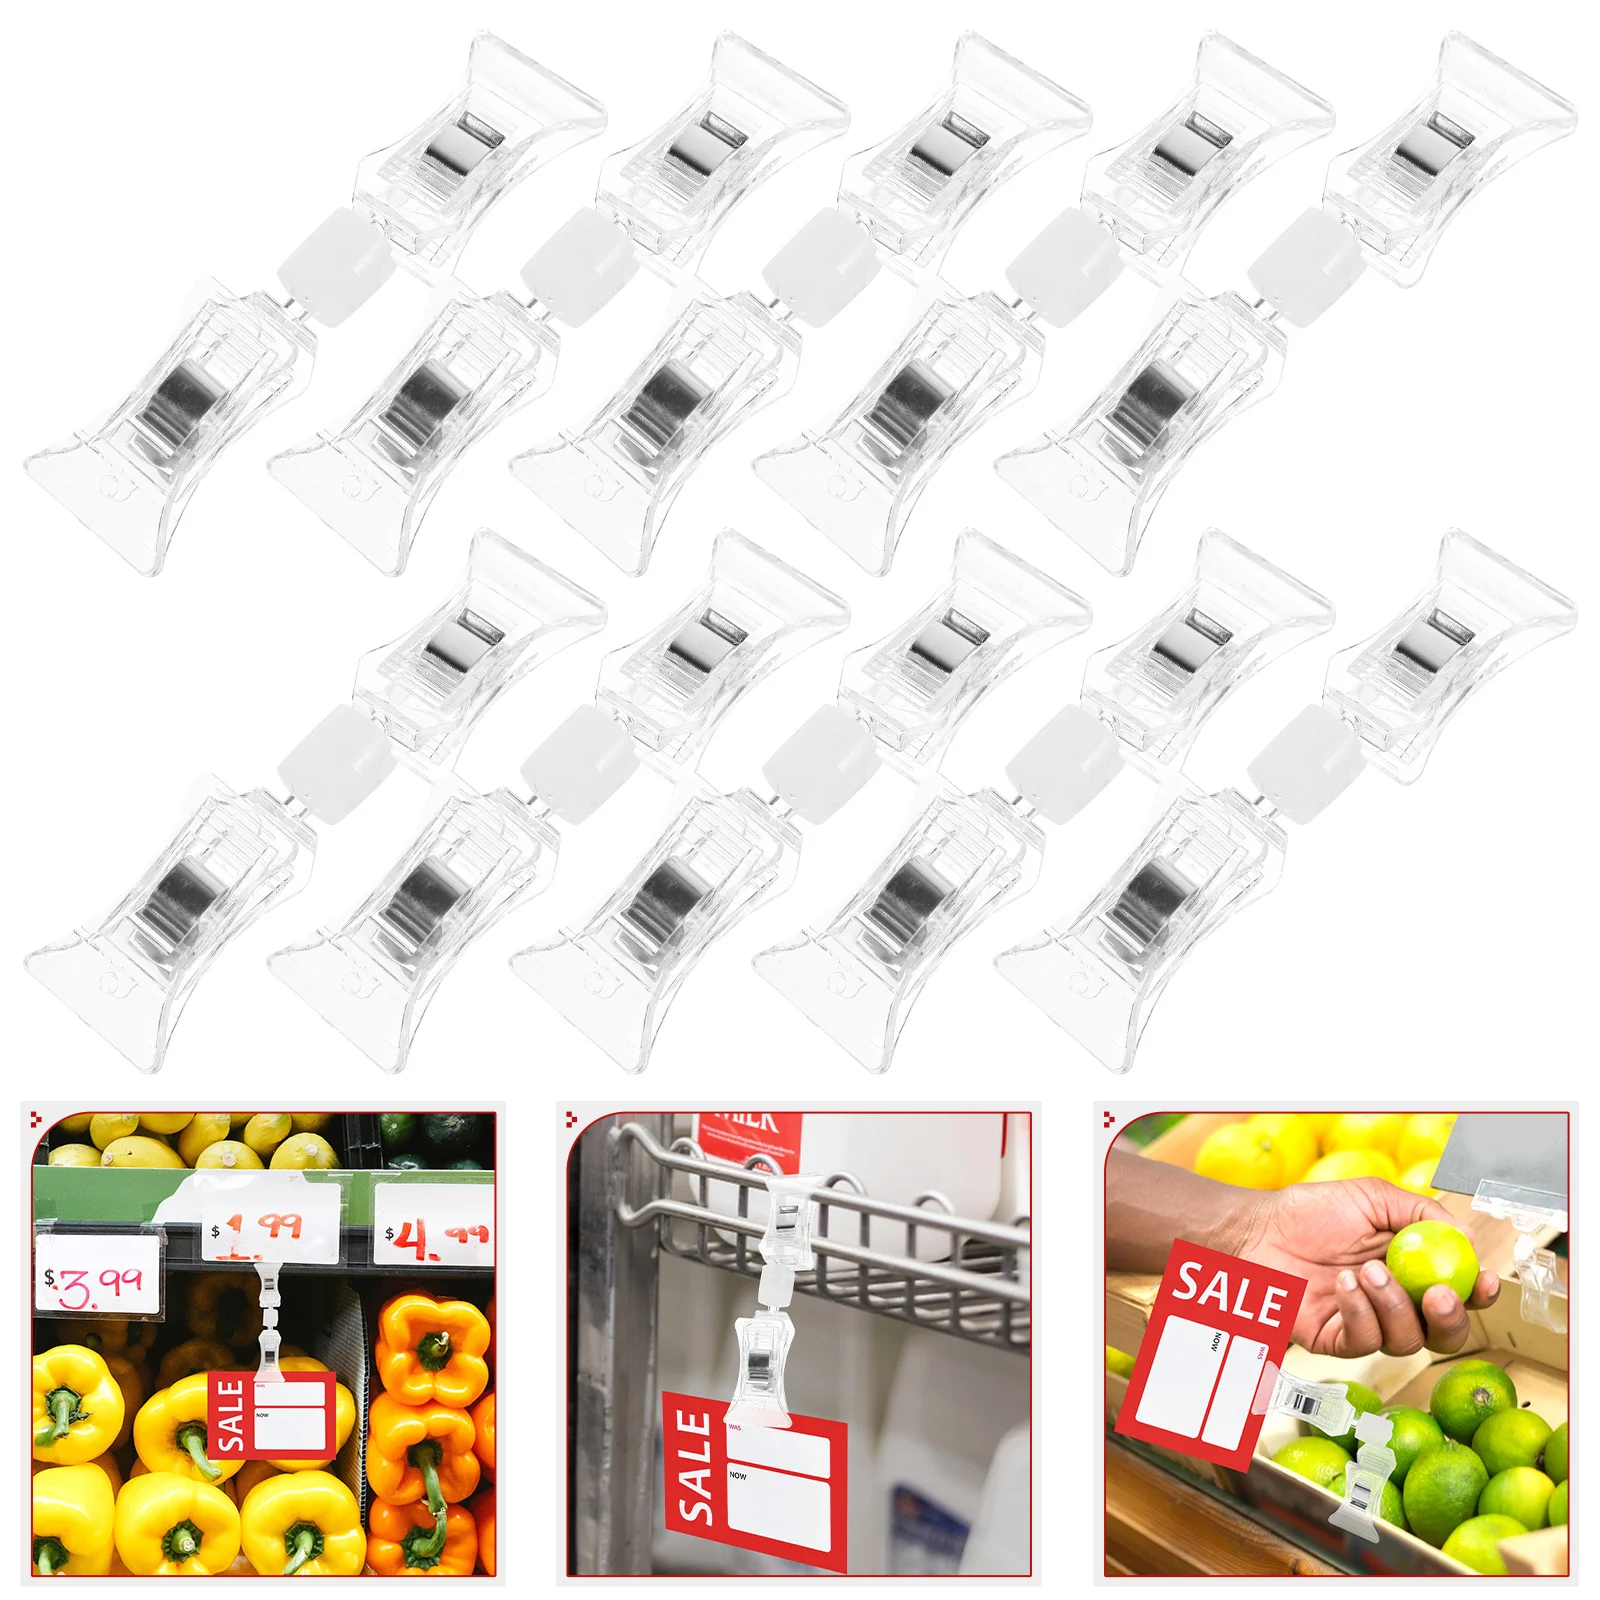 10 Pcs Advertising Double-headed Clip Price Sign Clips Display Shelf Explosion Stickers 6 pcs advertising clip double ended rotatable price tag clips explosion stickers